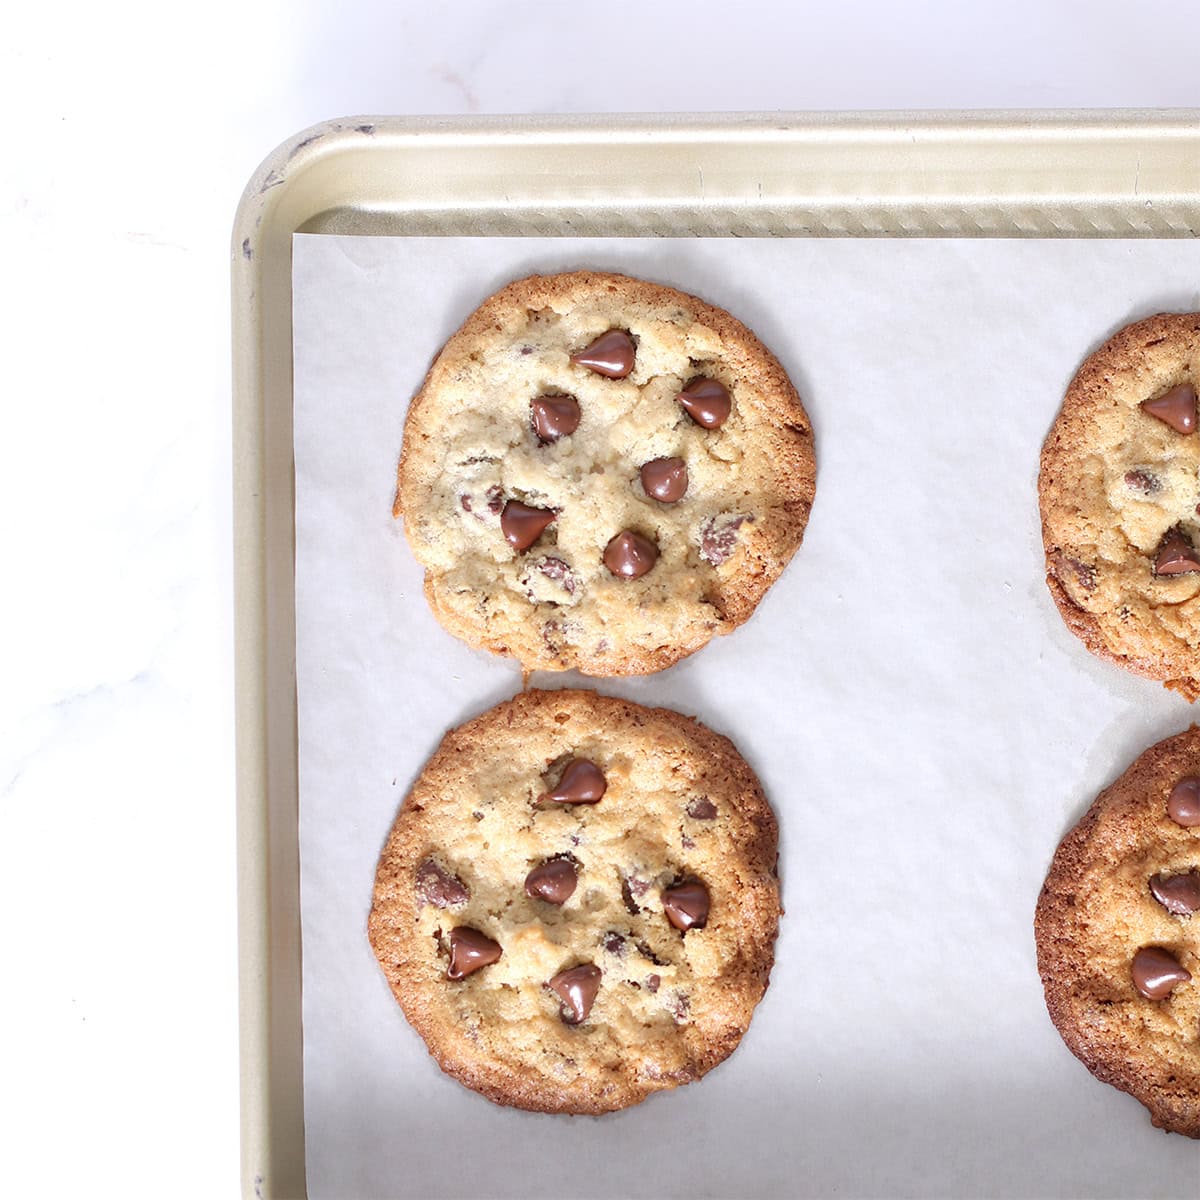 thin and crispy chocolate chip cookies made with almond flour baked in a pan.